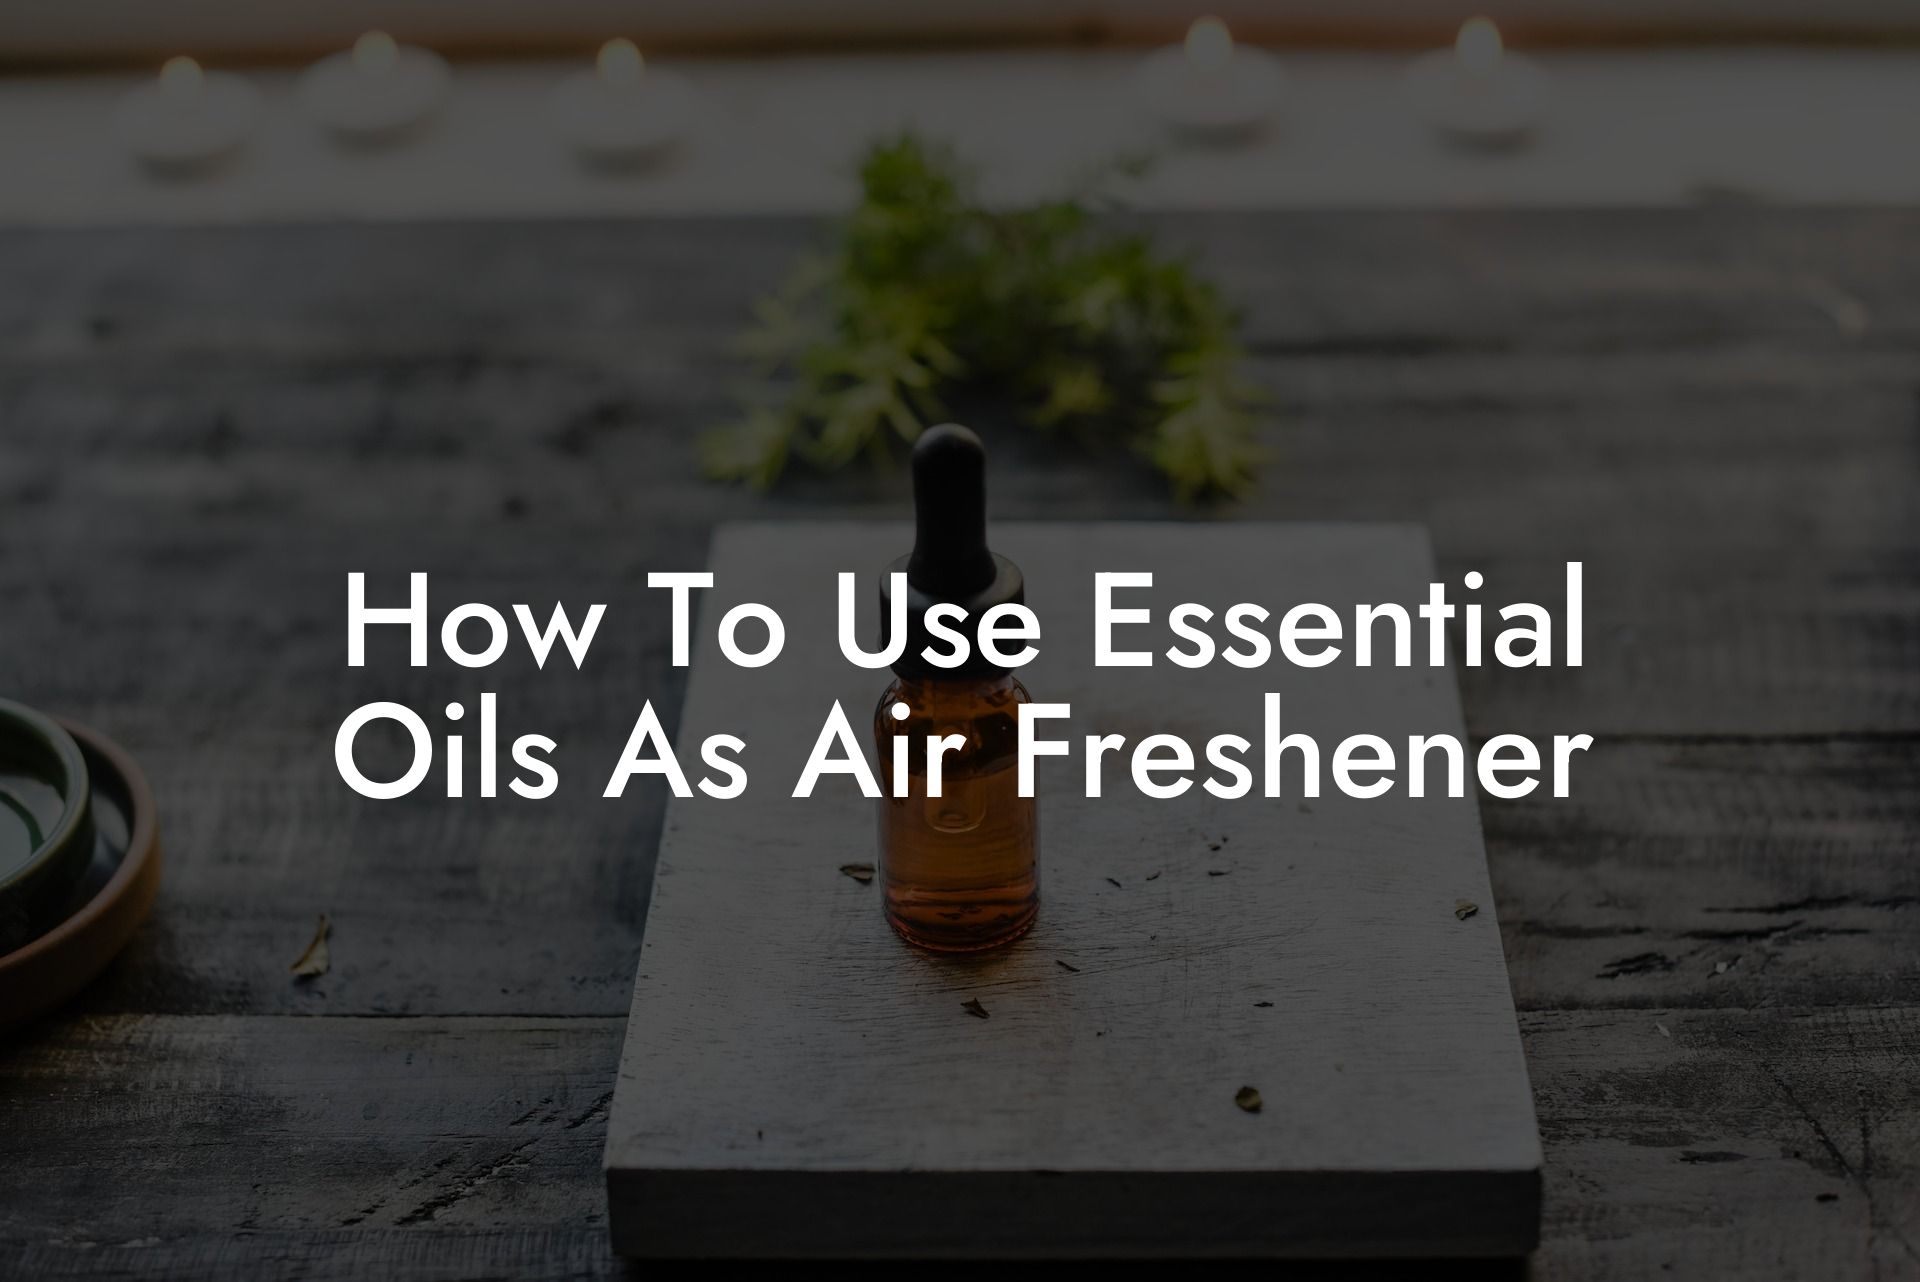 How To Use Essential Oils As Air Freshener